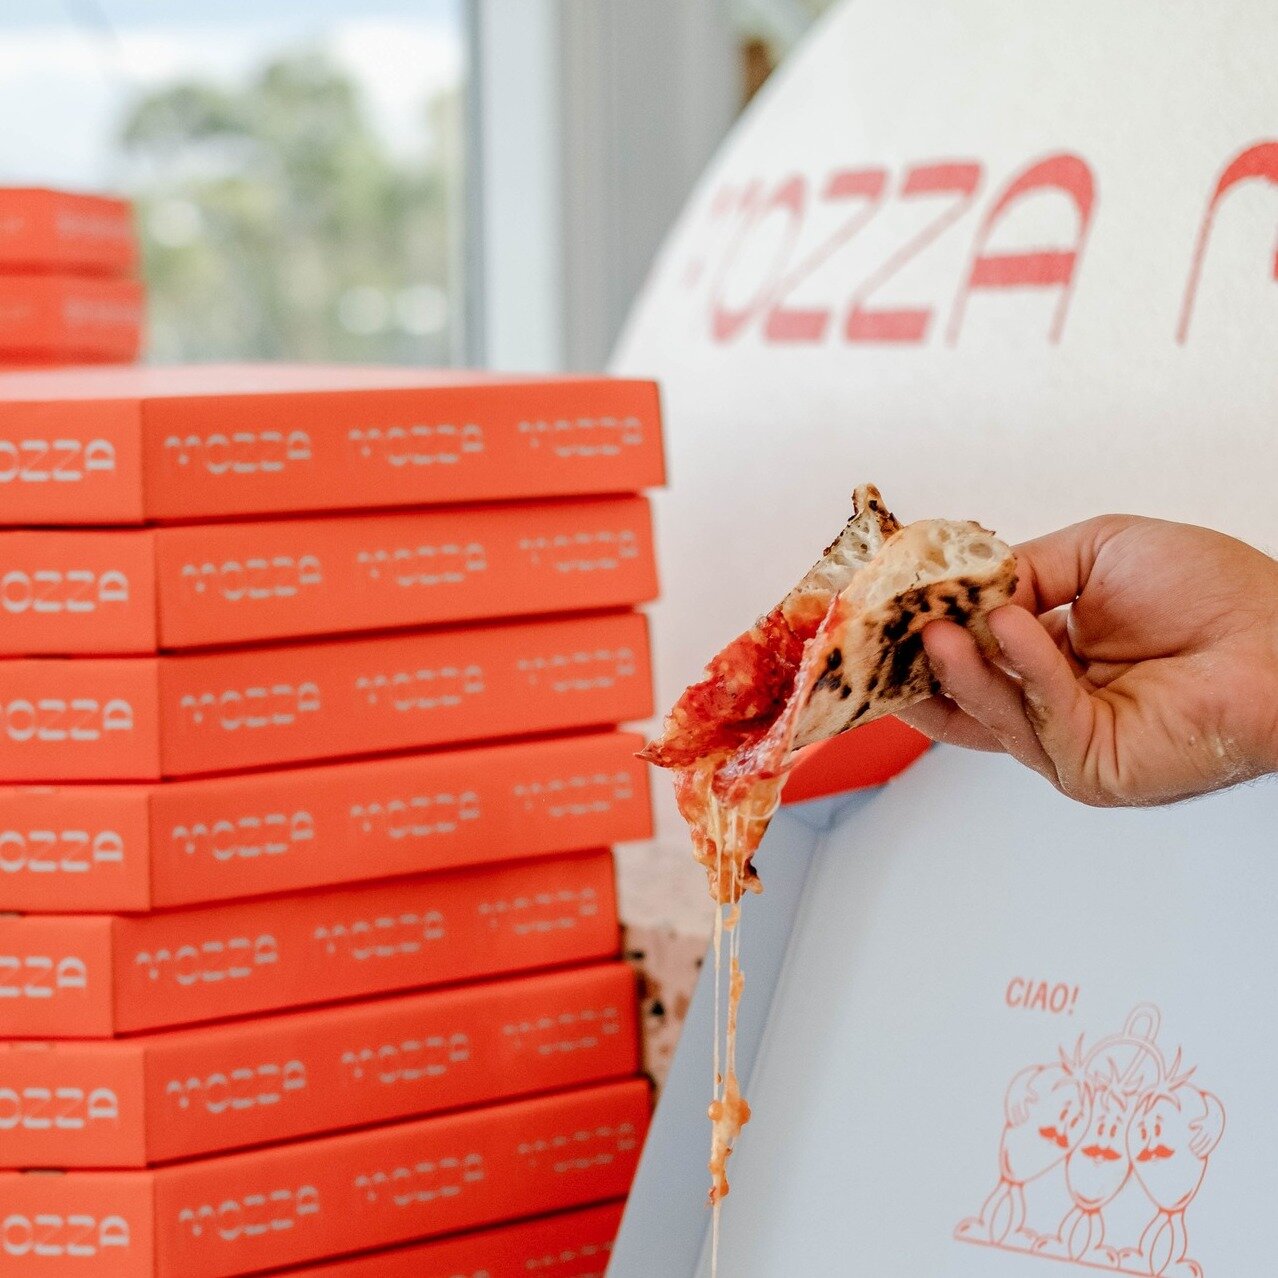 🍕 Make Sundays Easy with Mozza Mozza Takeaway Pizza! 🚗

Craving a hassle-free and delicious meal for your Sunday? Look no further! Swing by Mozza Mozza to pick up your order, and voila! You're all set for a relaxed and delicious Sunday feast. 

Ord